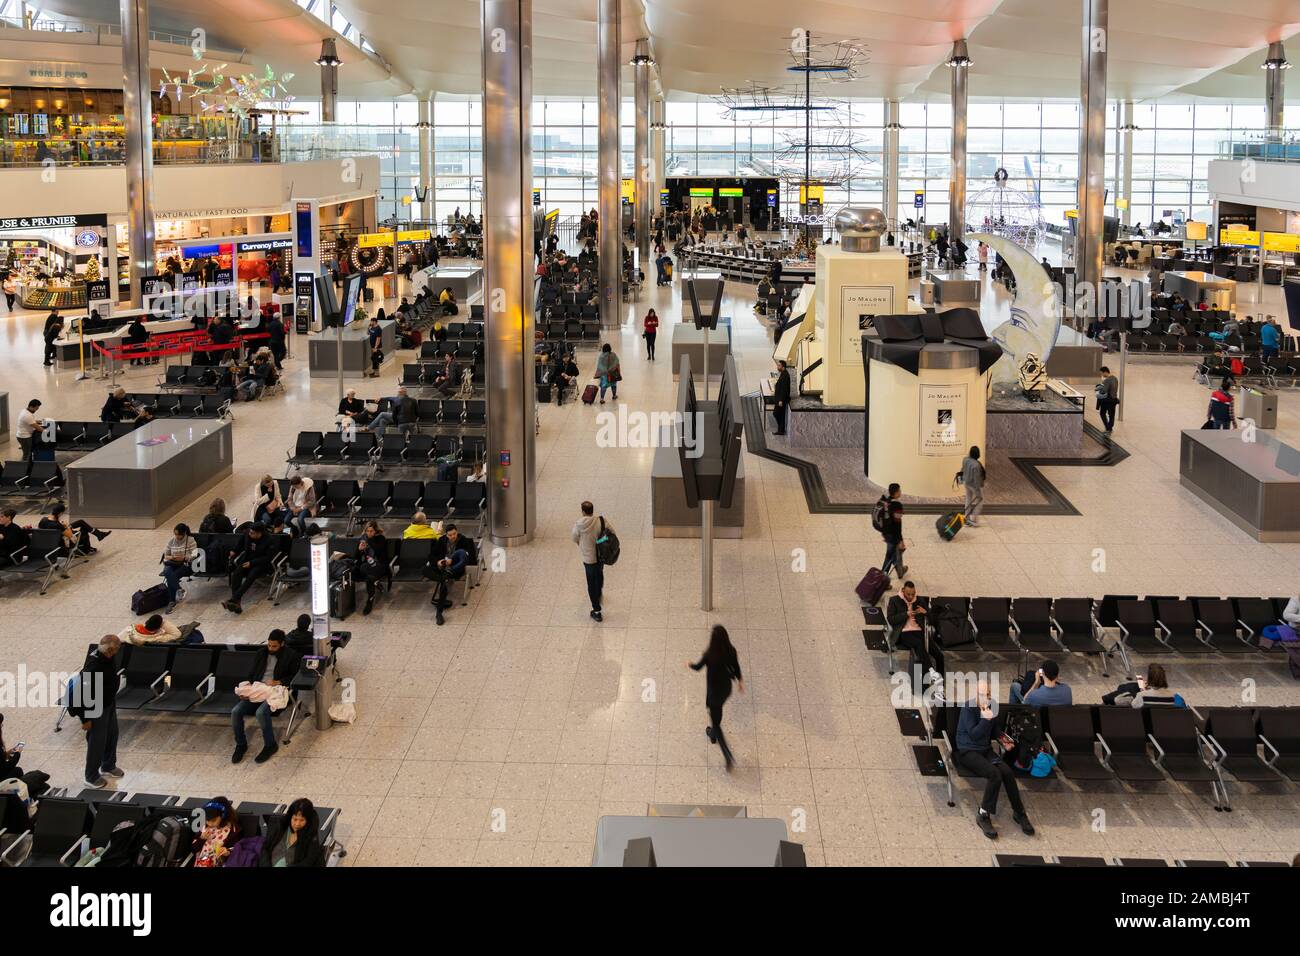 An aerial view on the passenger terminal / departure lounge at Heathrow Airport (LHR) Terminal 2 (The Queen’s Terminal), London, UK Stock Photo